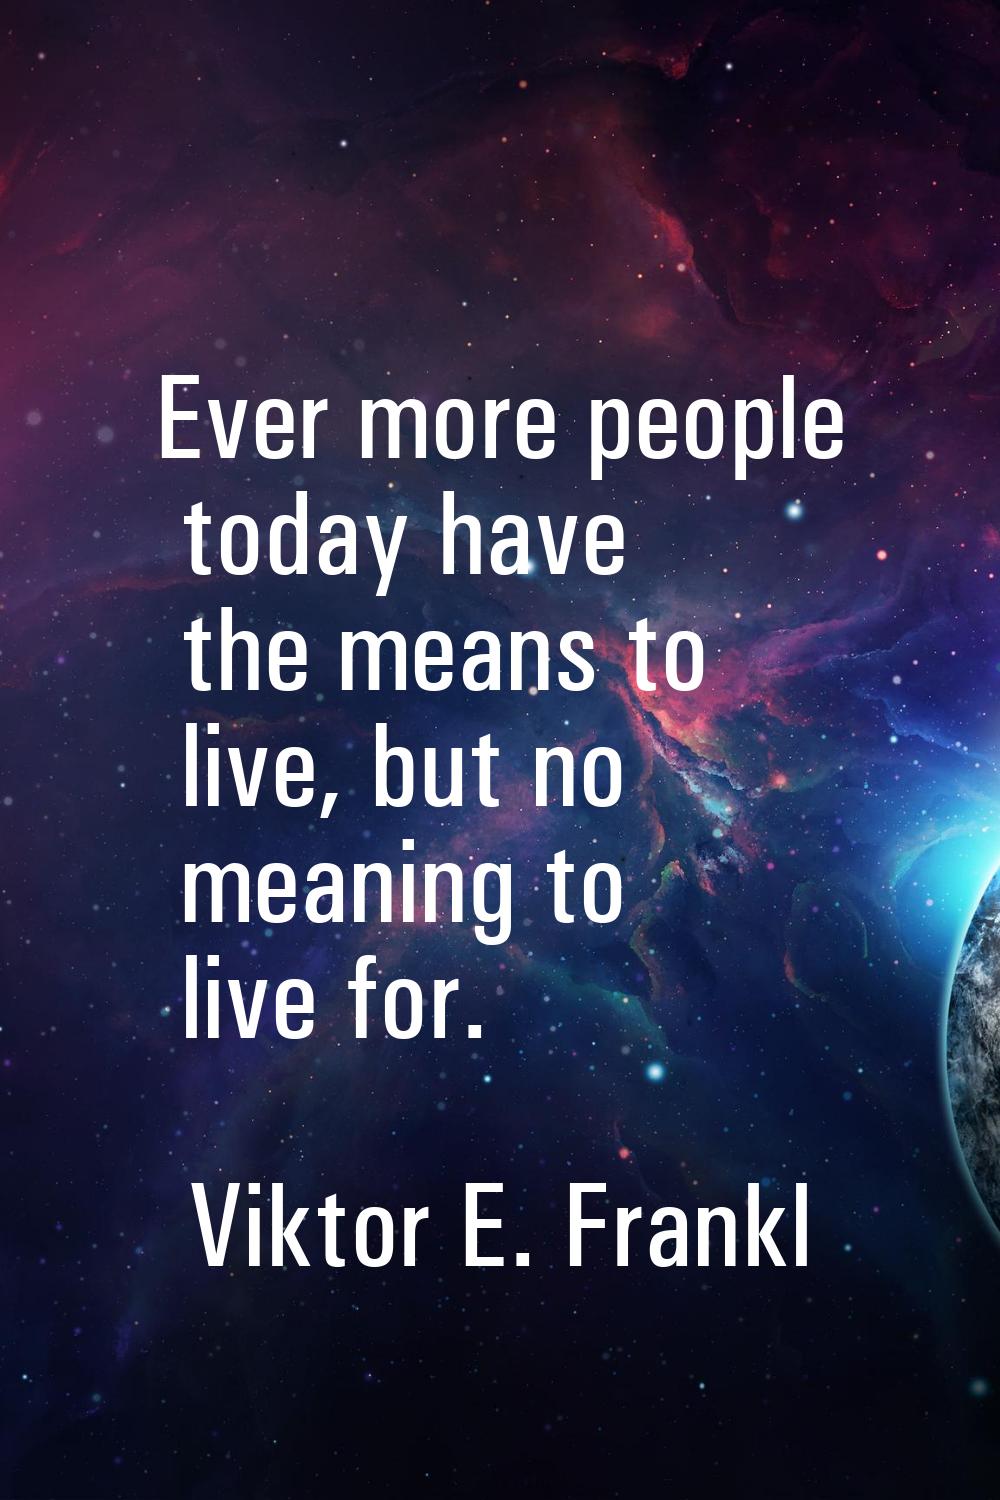 Ever more people today have the means to live, but no meaning to live for.